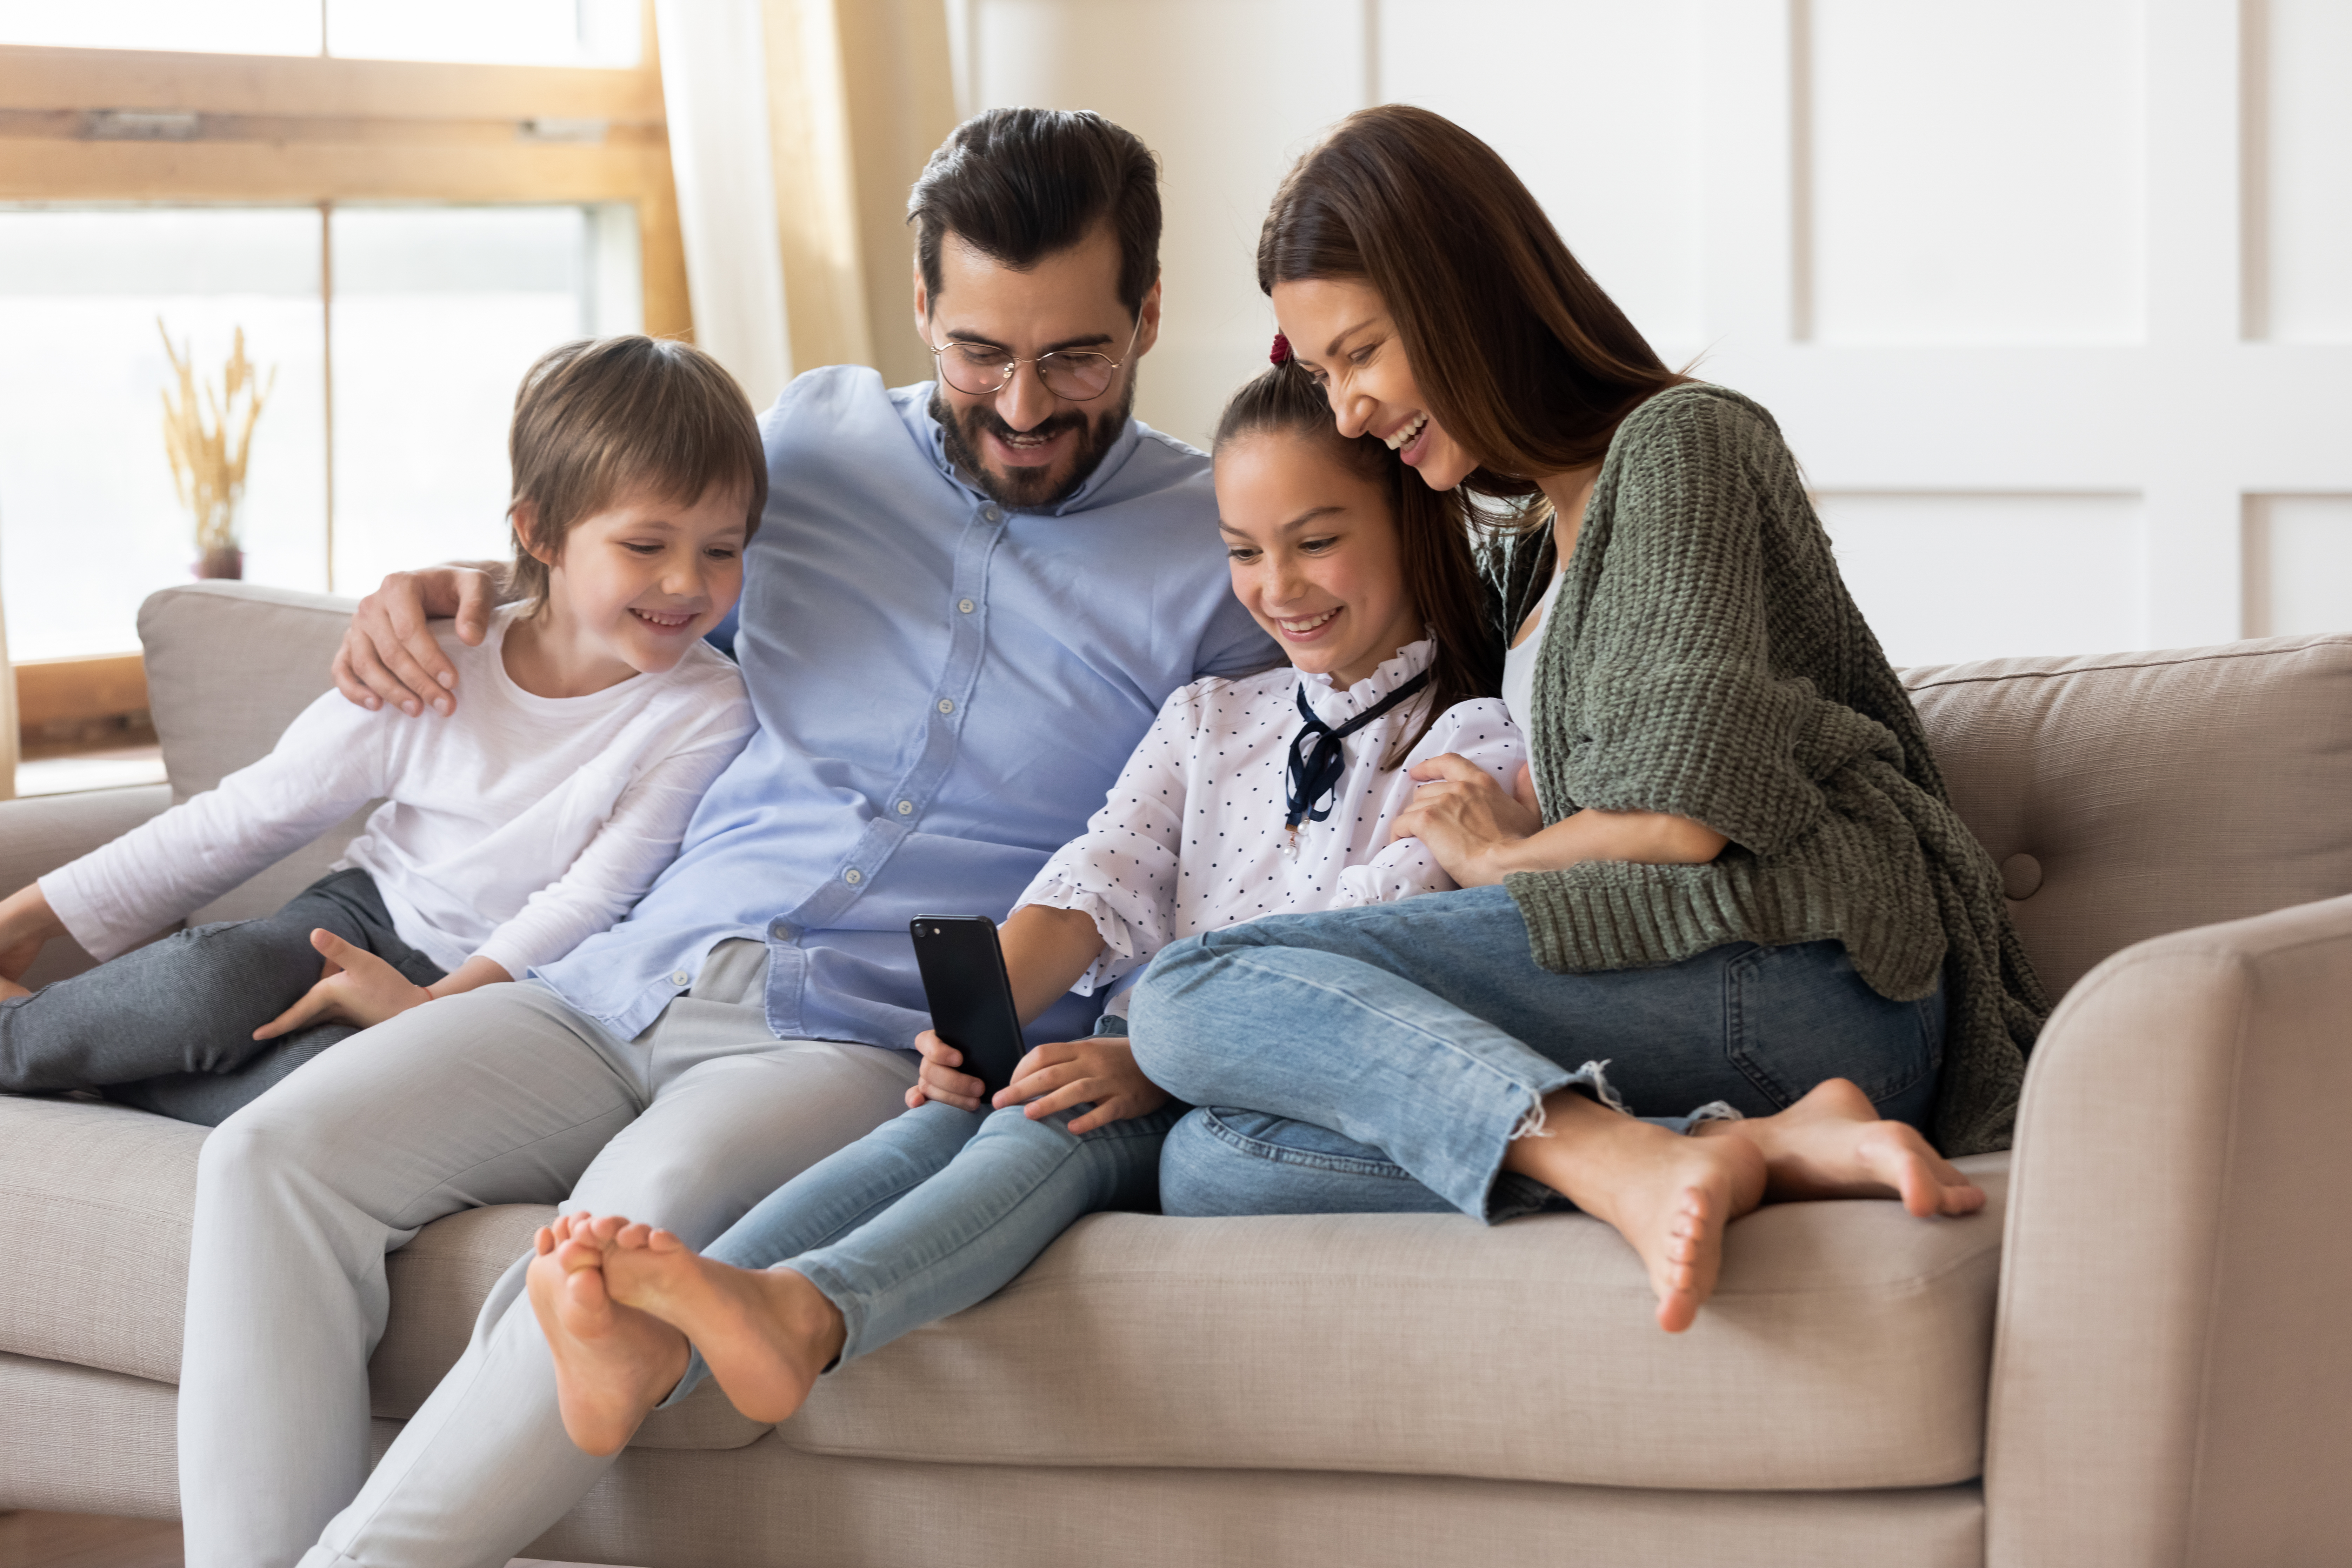 Happy parents relaxing at home with their young children | Source: Shutterstock